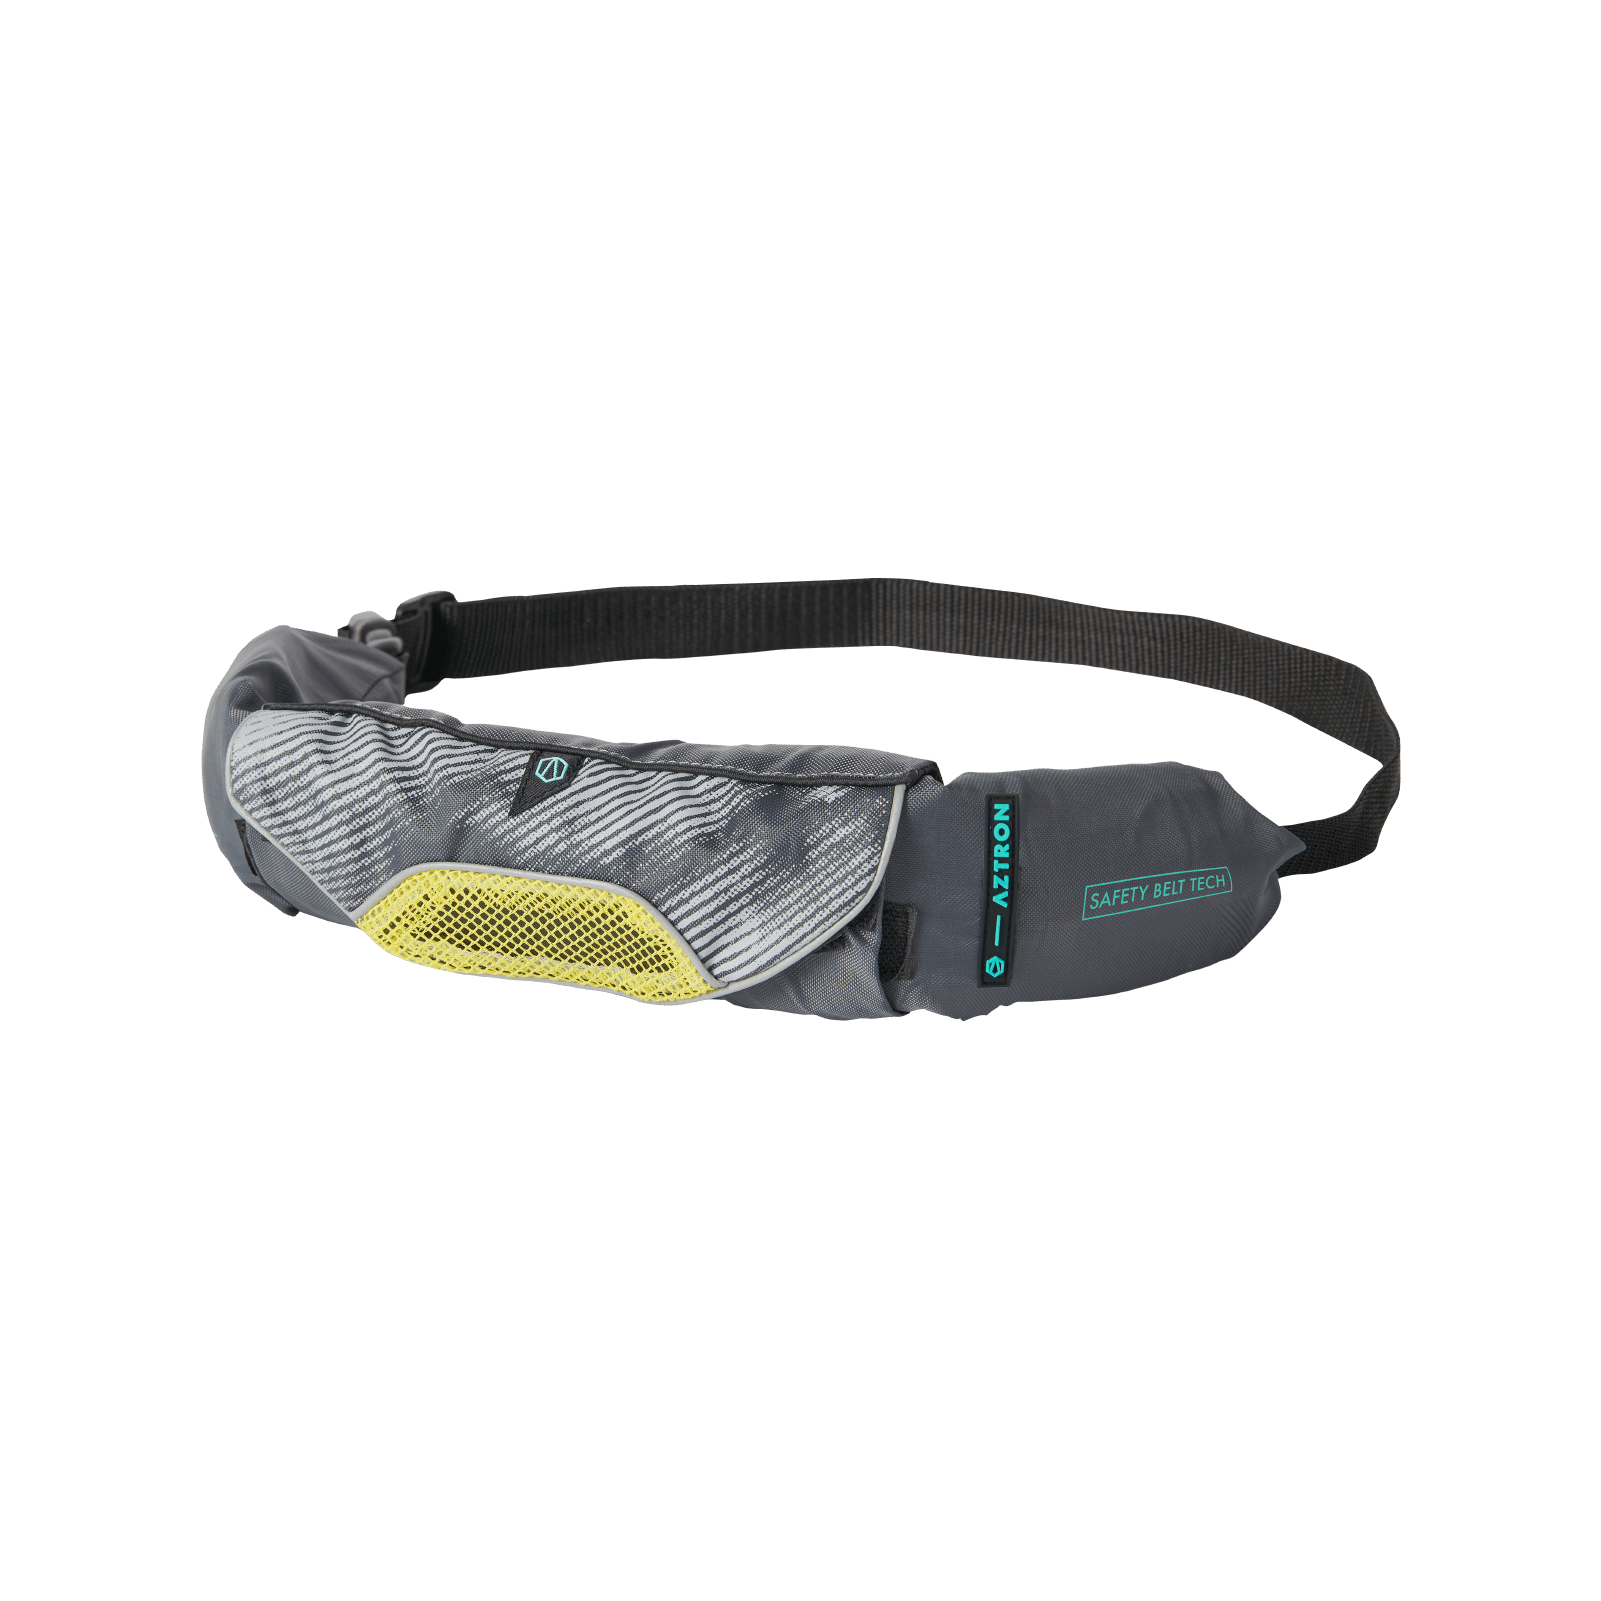 Aztron ORBIT Inflatable Safety Belt - Grey-Paddleboard Accessories-Aztron Sports-1